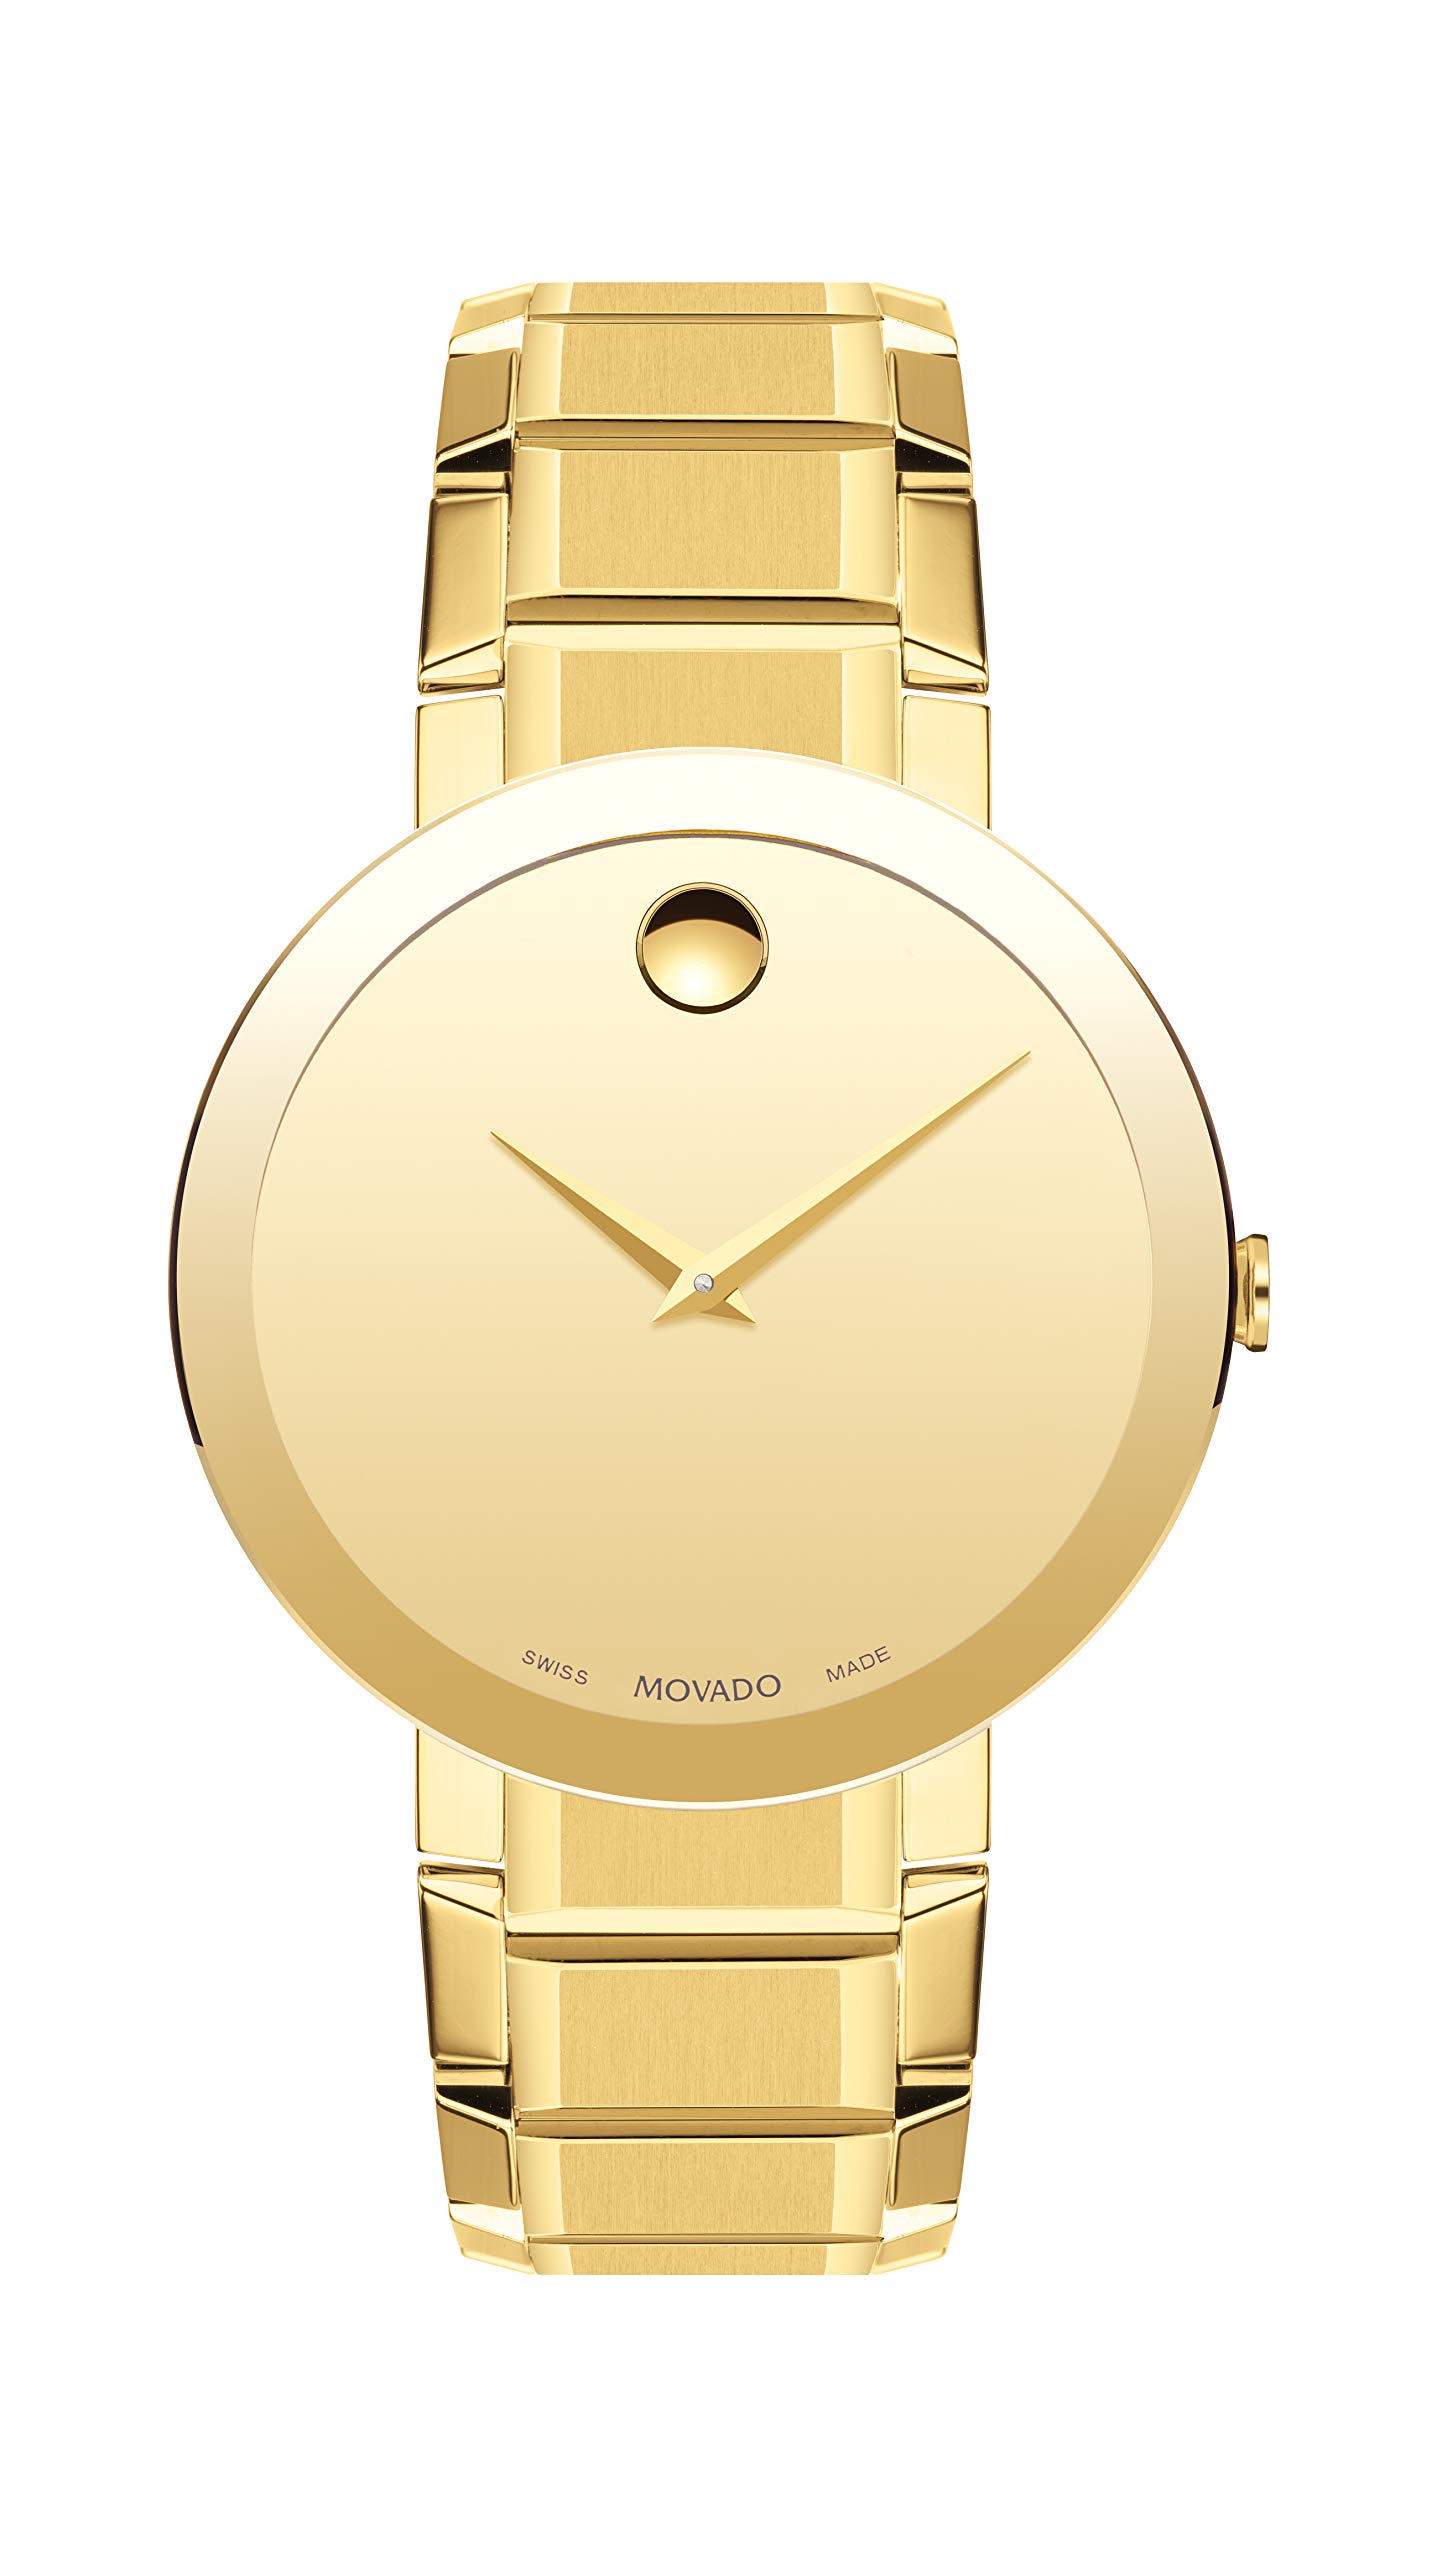 Movado Men's Sapphire Yellow Gold Watch with a Concave Dot Museum Dial, Gold (Model 607180)